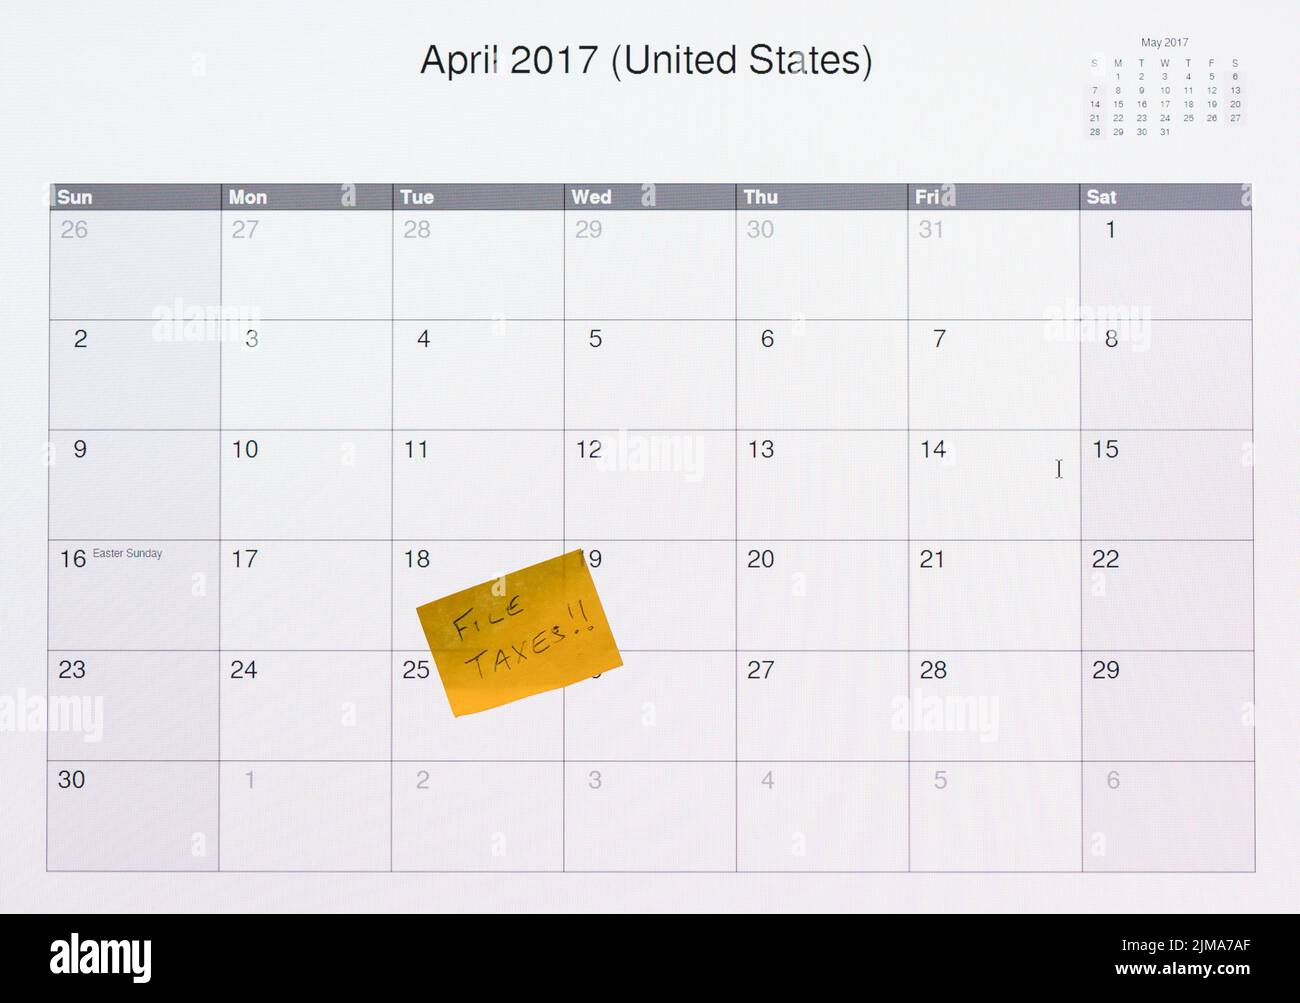 Computer monitor calendar for tax filing day 2017 Stock Photo